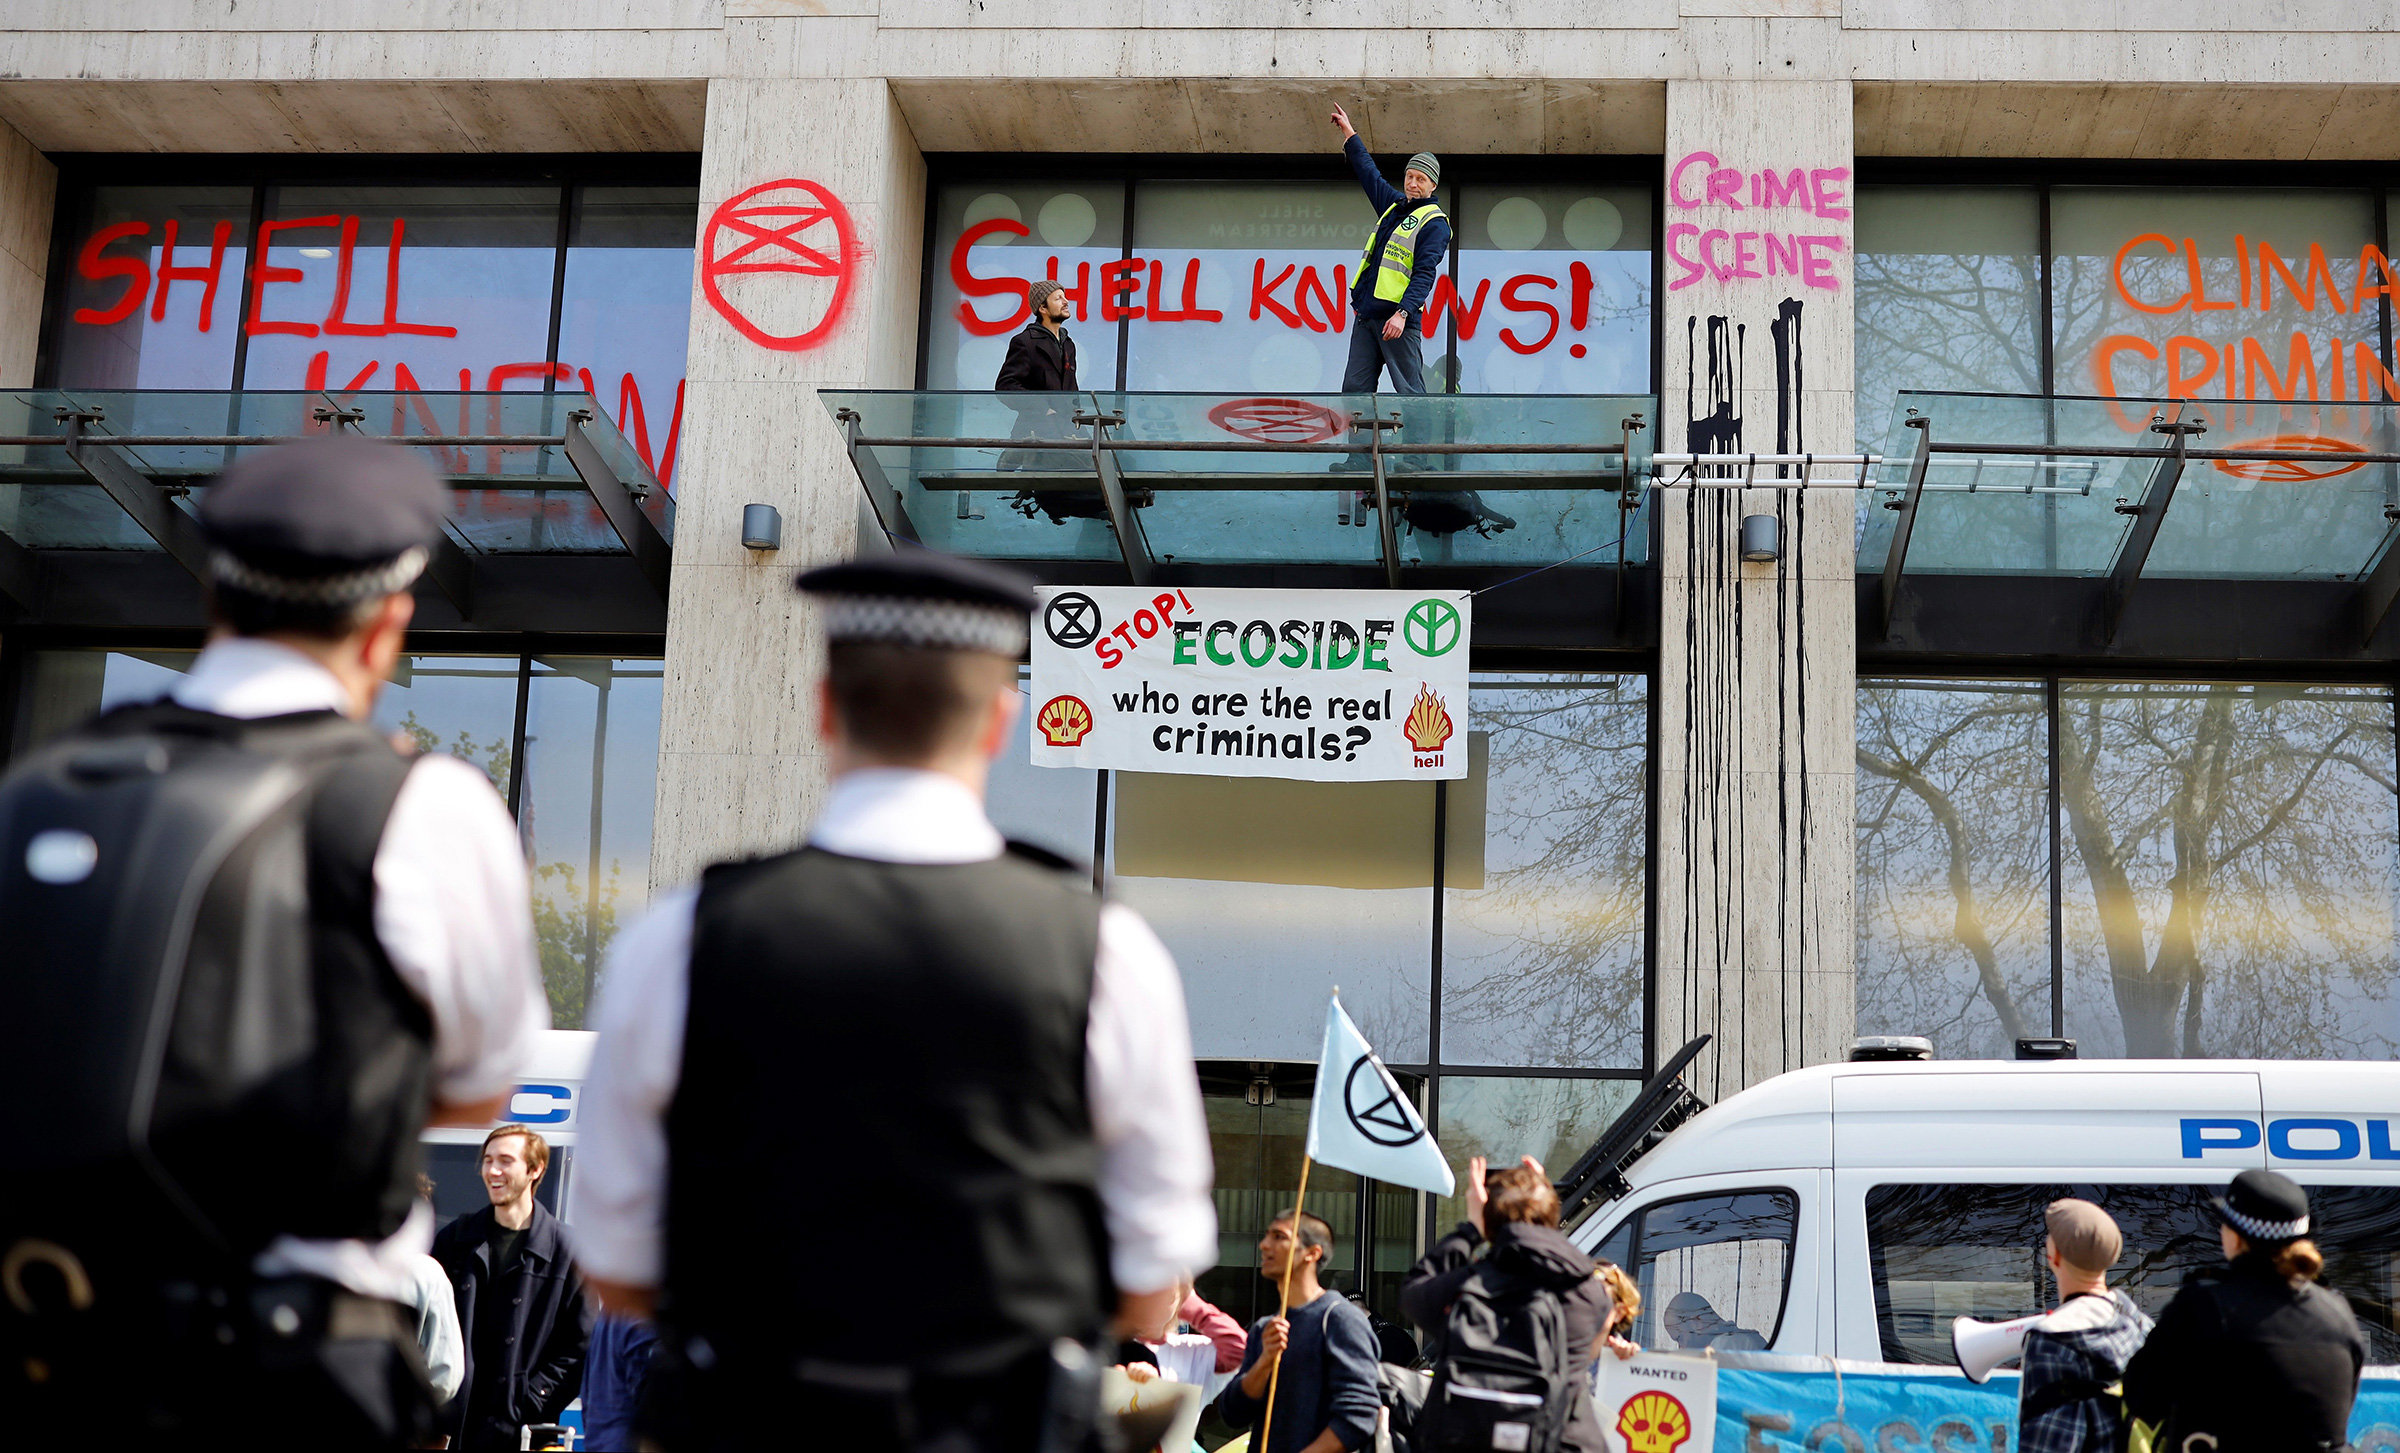 Extinction Rebellion protests outside Shell’s London office in April 2019 (Tolga Akmen—AFP/Getty Images)